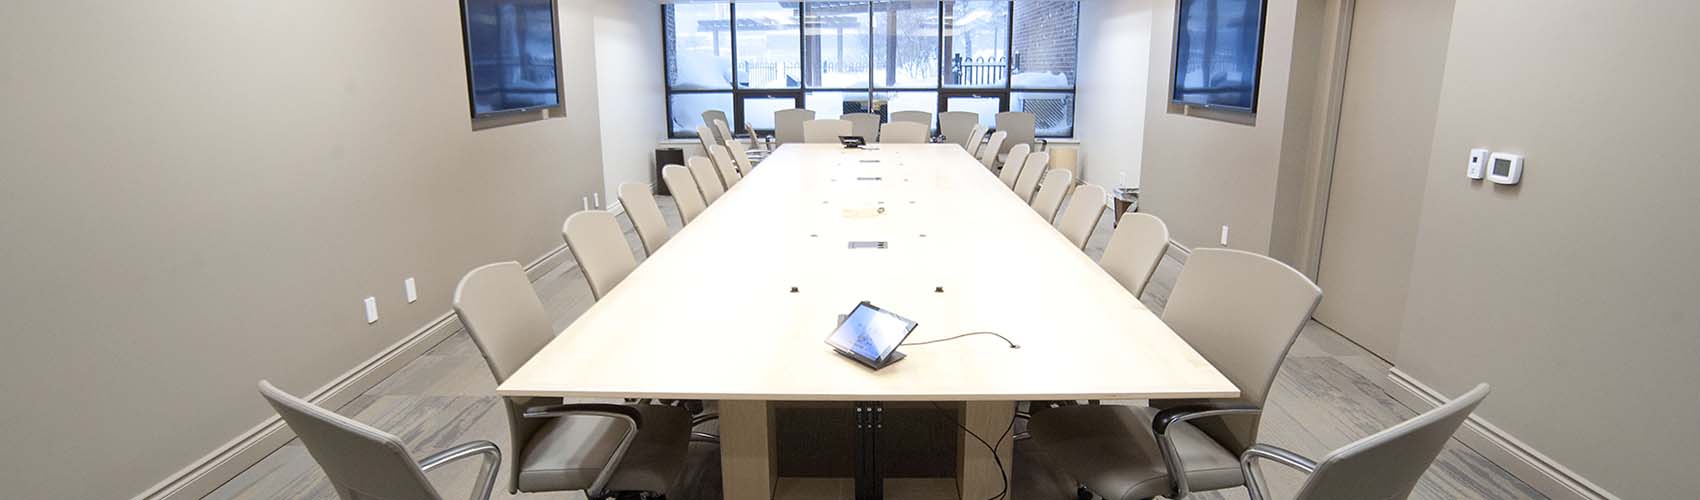 A empty, rectangular boardroom table with chairs